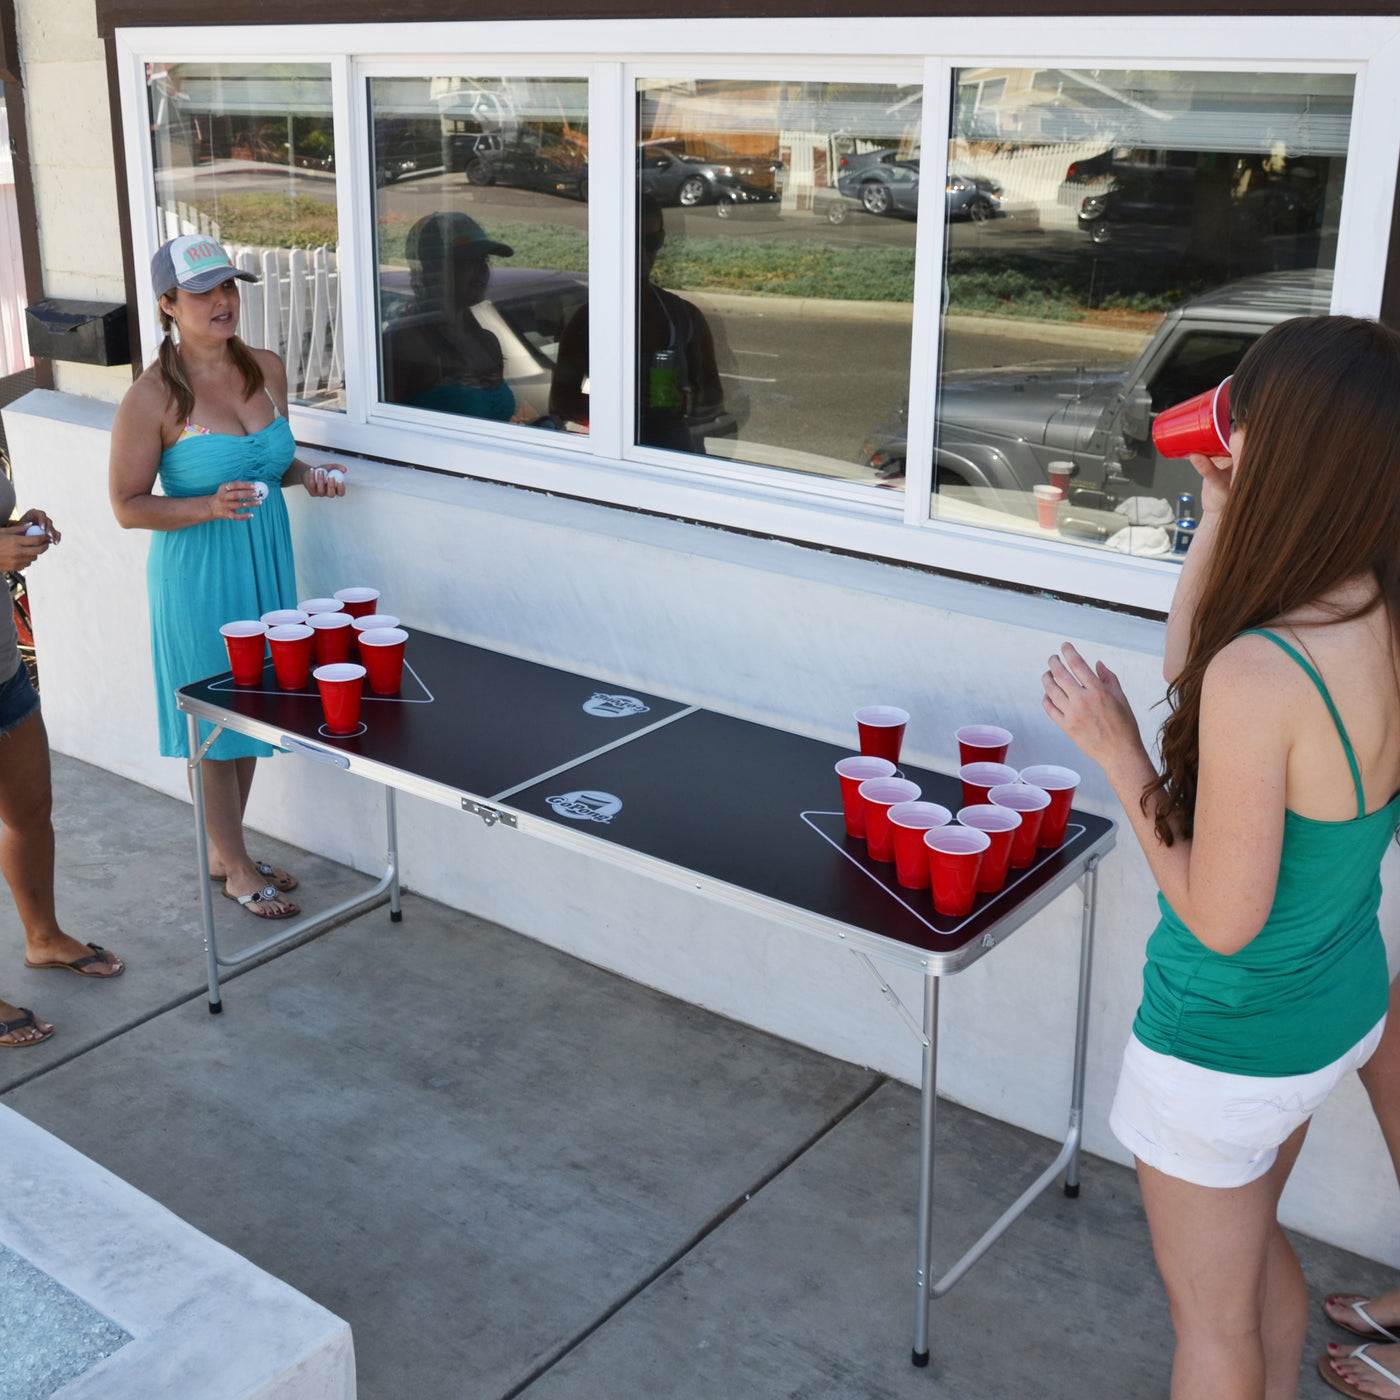 GoPong 6' Portable Folding Beer Pong Table